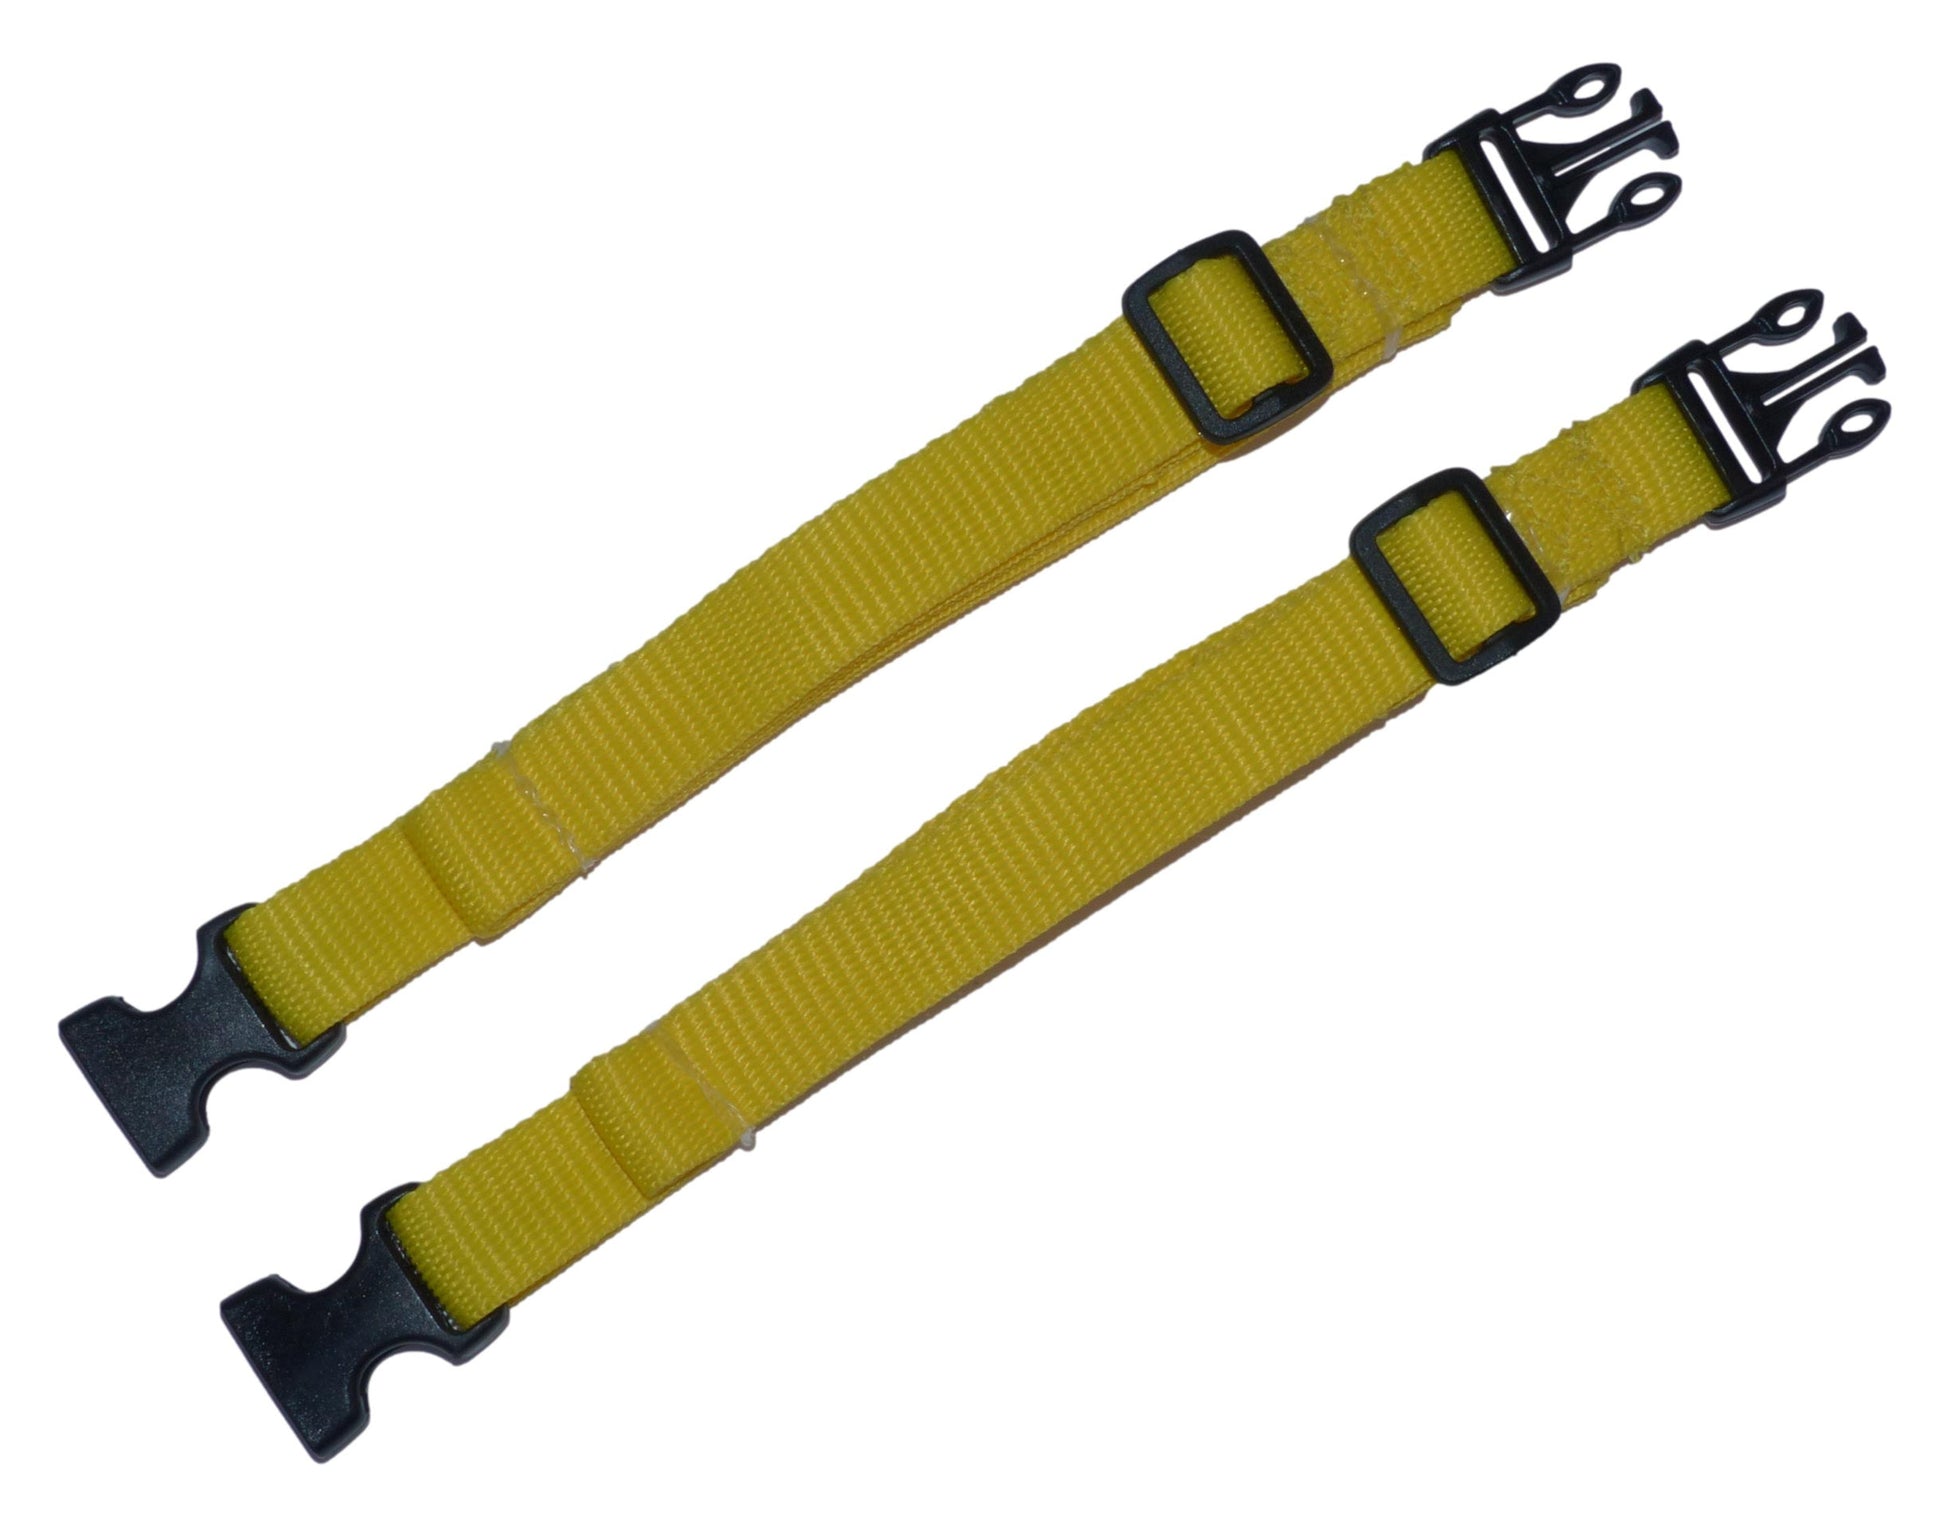 Benristraps 19mm Webbing Strap with Quick Release & Length-Adjusting Buckles (Pair) in yellow (4)